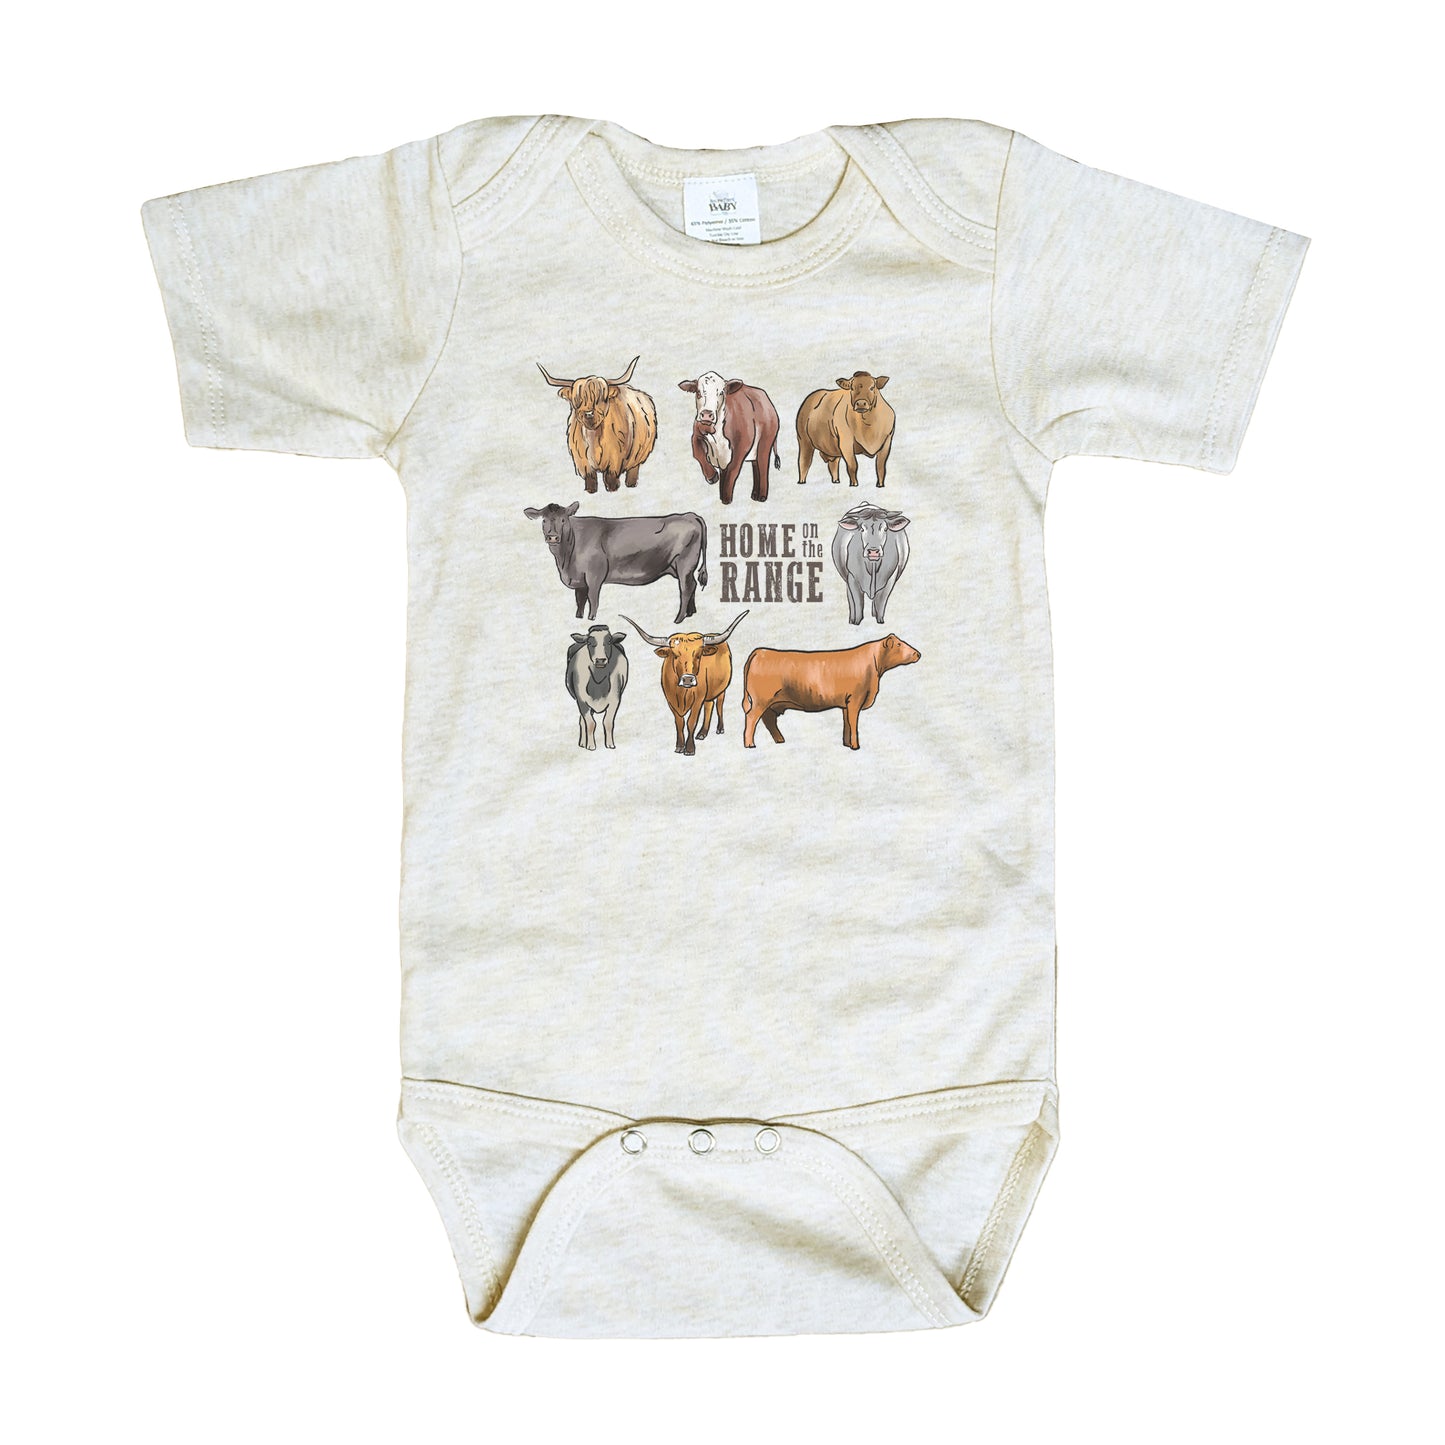 "Home on the range" Beige Baby Body Suit | Western Line